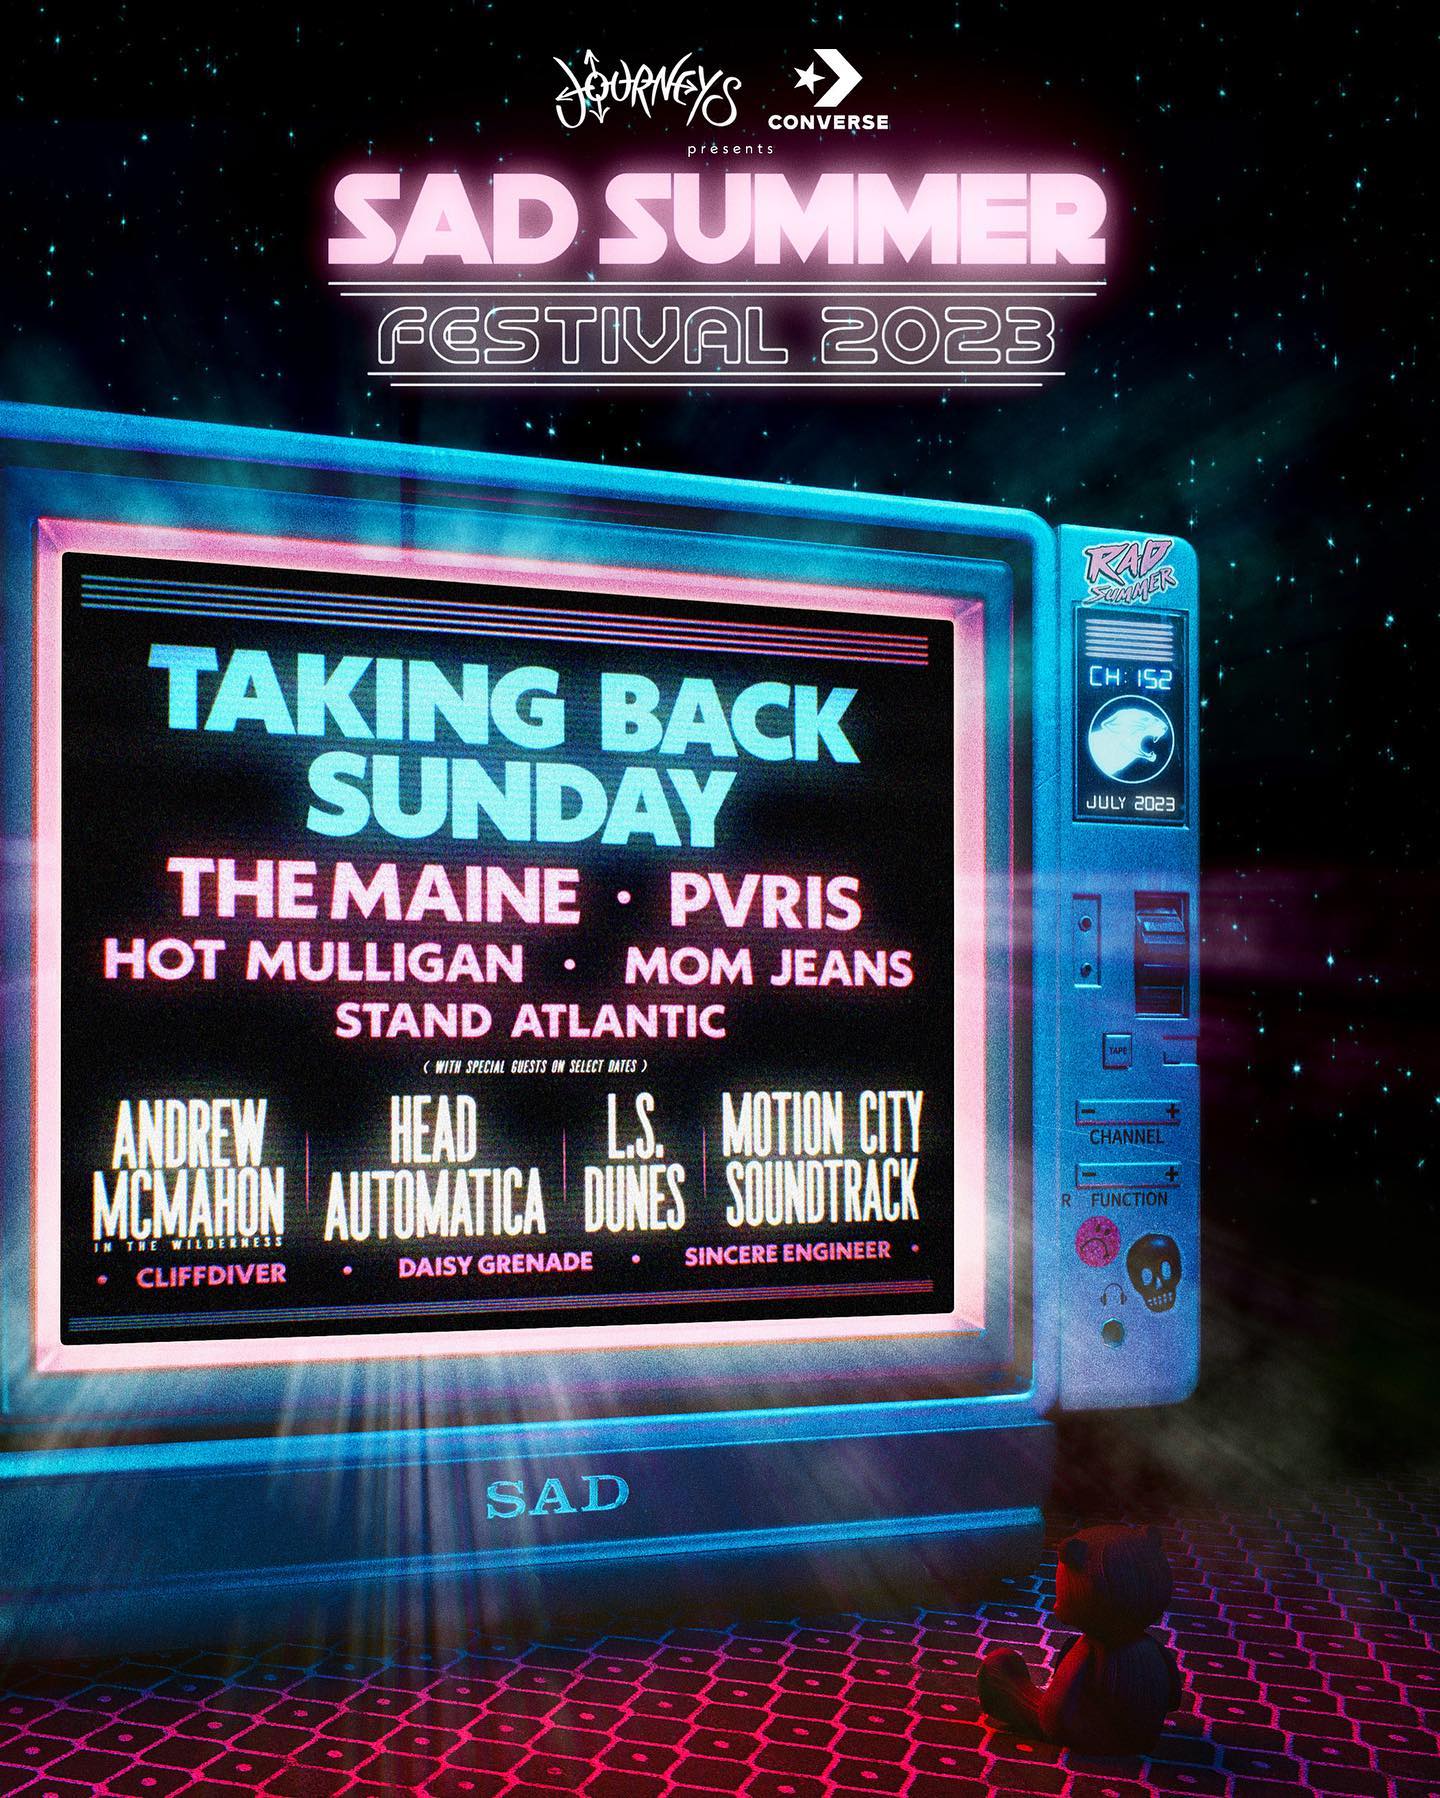 Sad Summer Festival: Taking Back Sunday, The Maine, Pvris, Hot Mulligan & Mom Jeans at Daily's Place Amphitheater